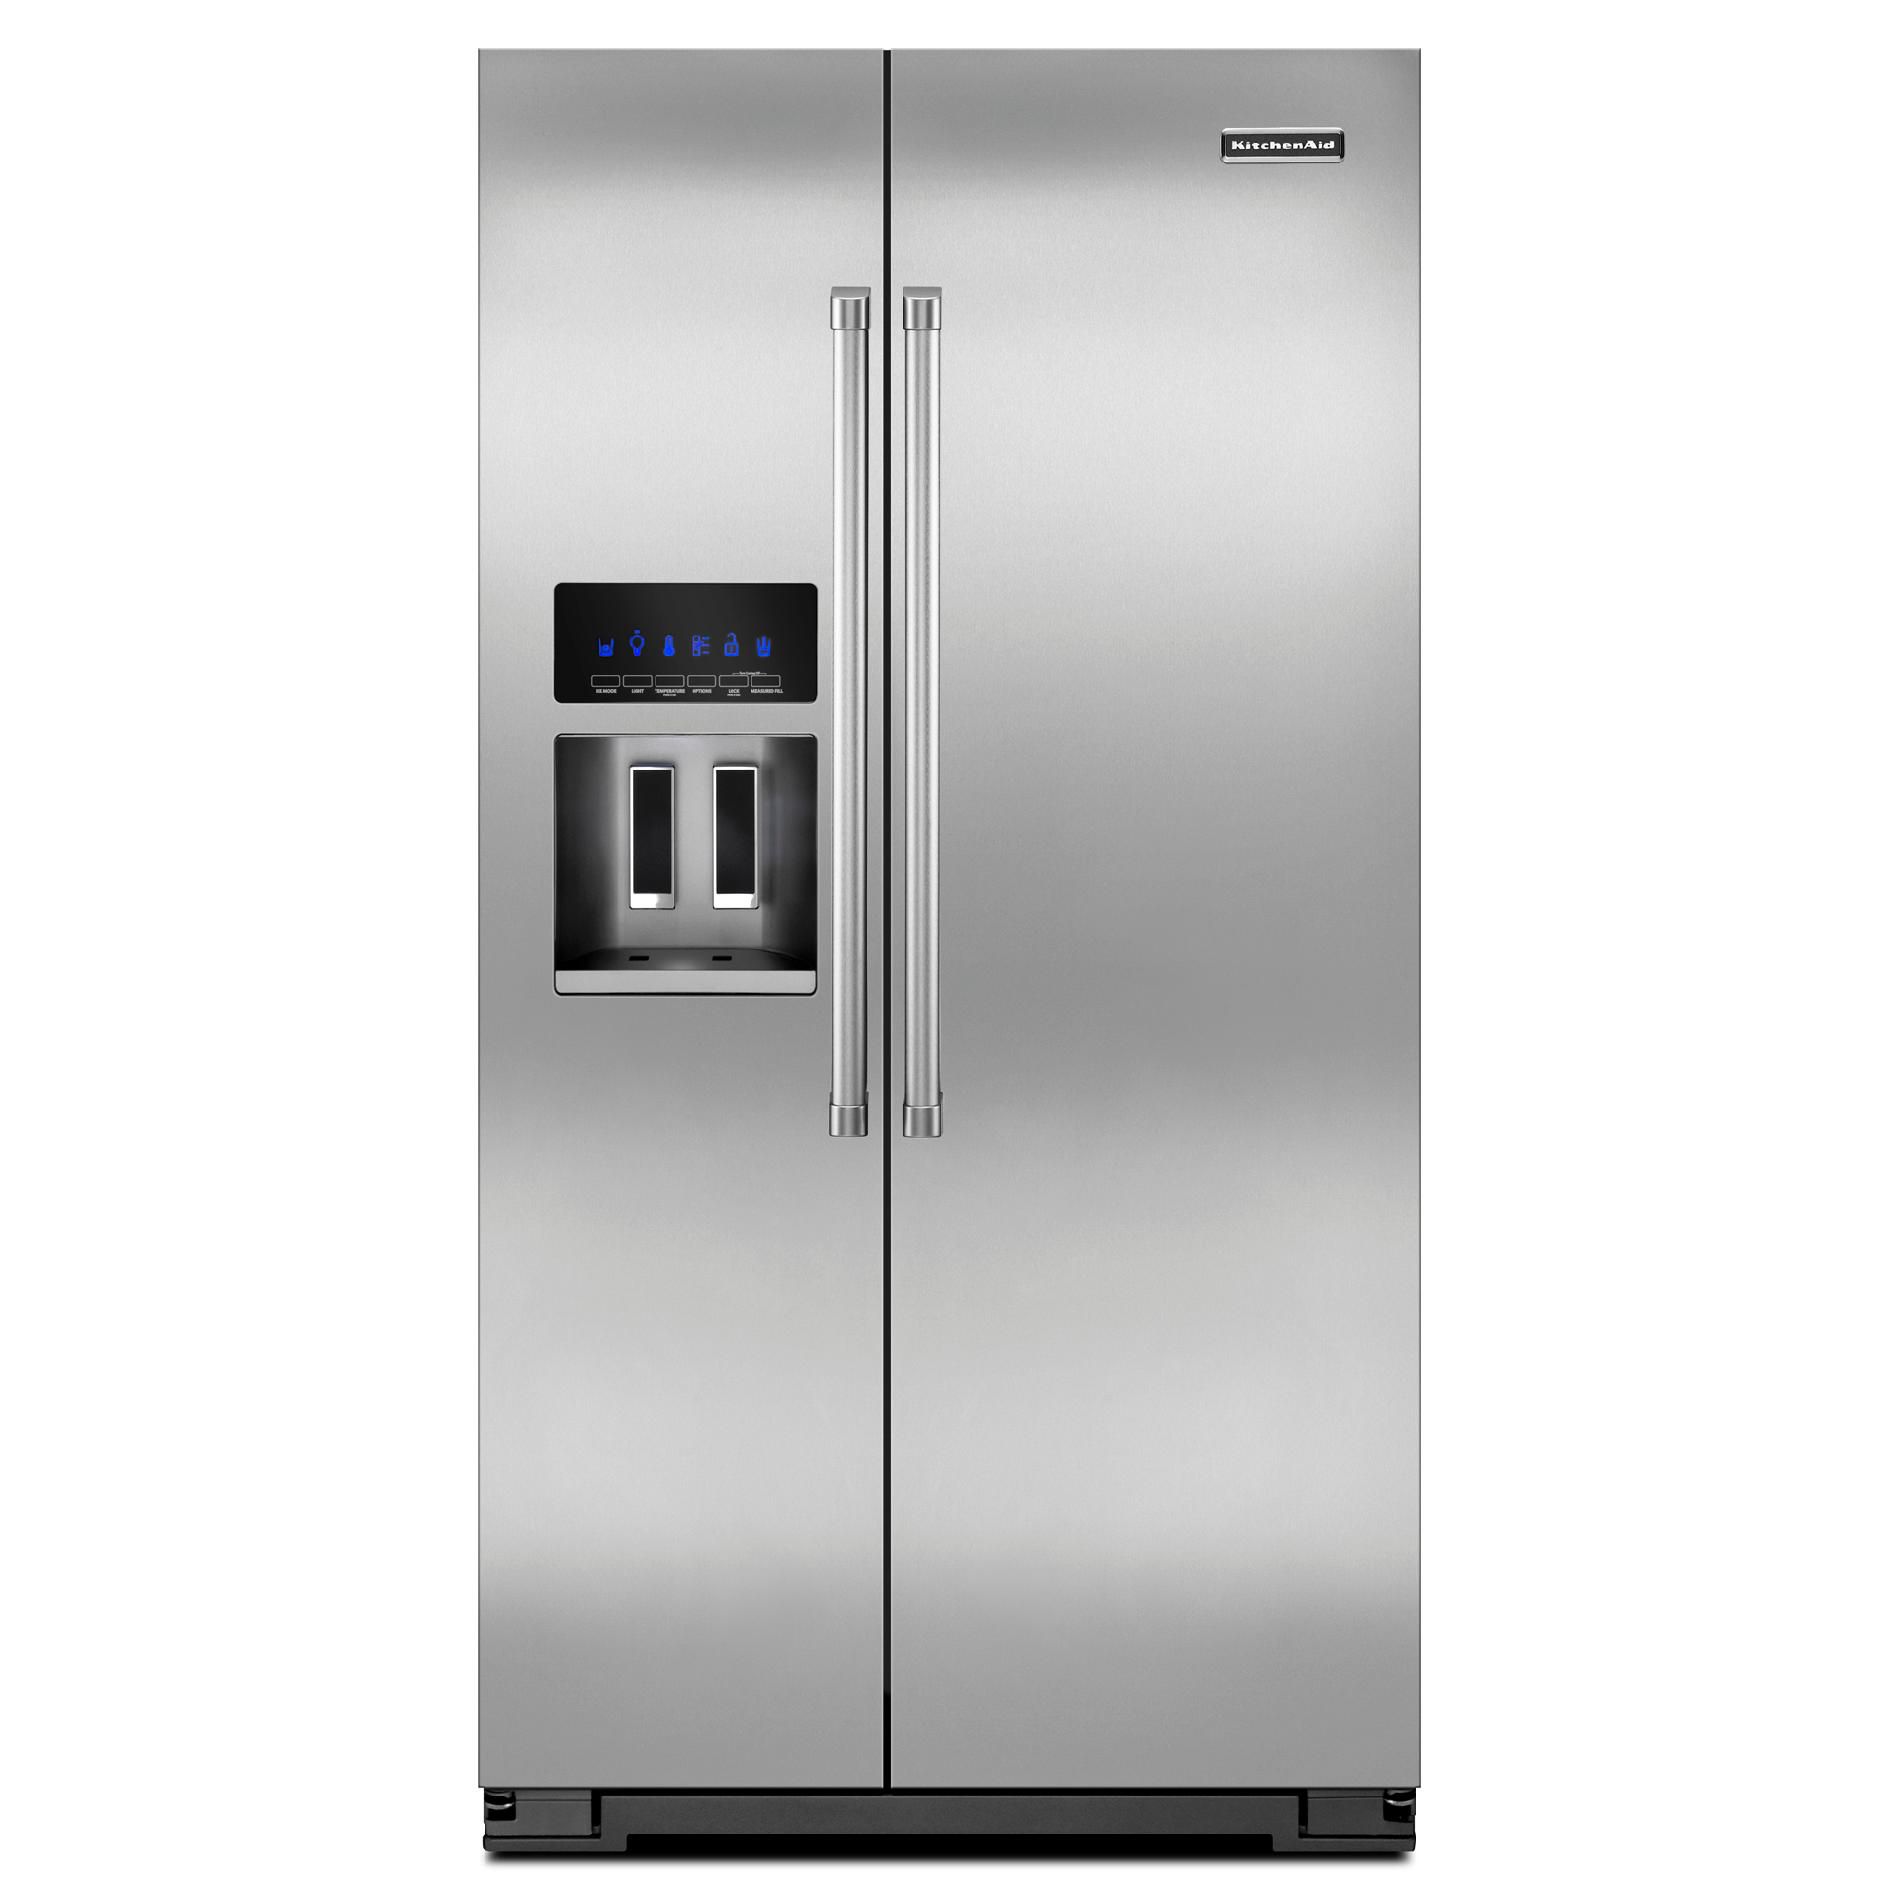 KitchenAid 24 cu. ft. Counter-Depth Side-by-Side Refrigerator Stainless steel